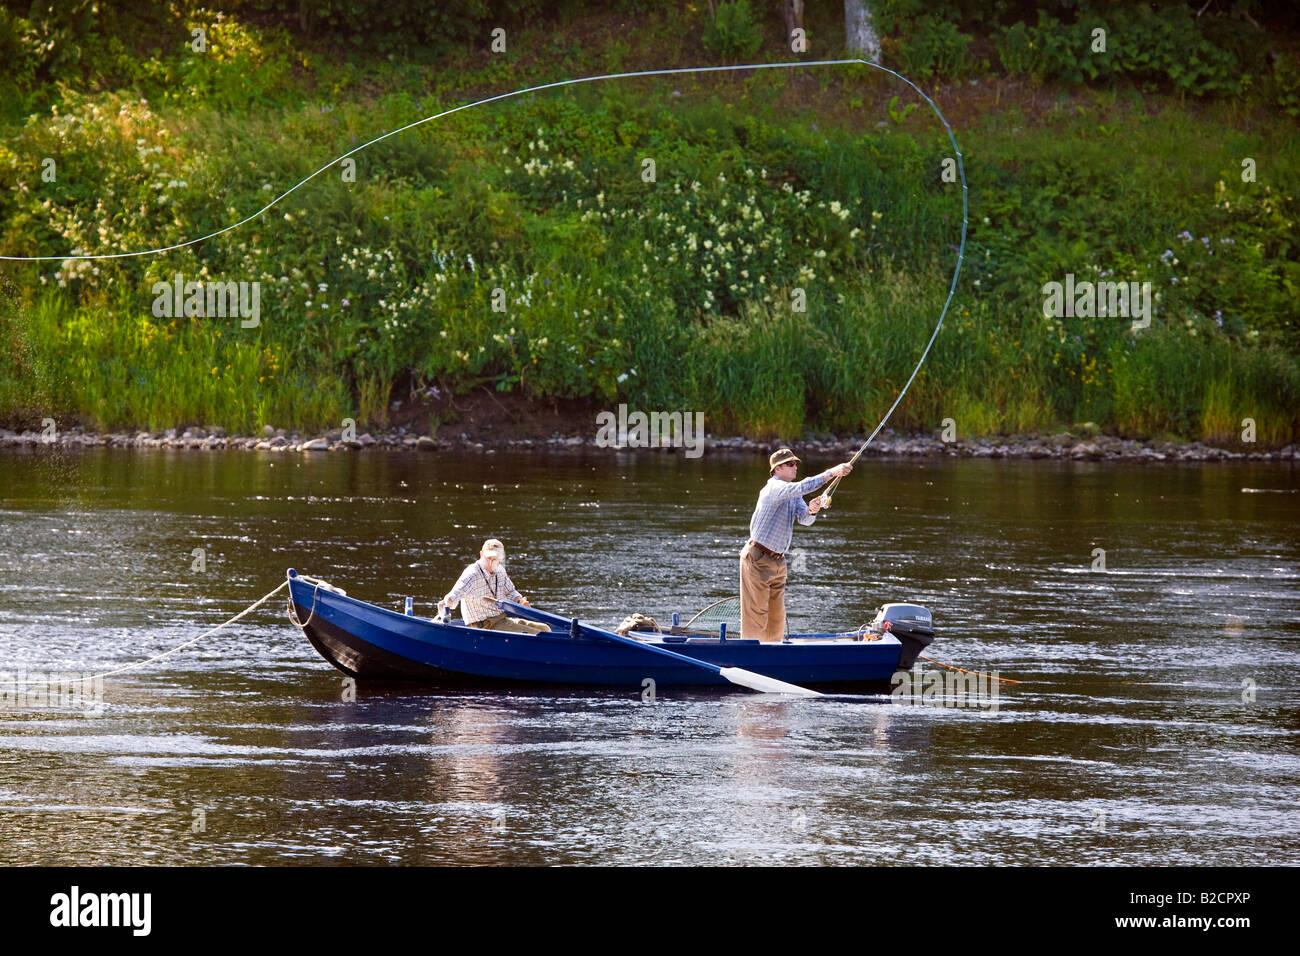 Rowing Boat fisherman, Angler Casting with Fly rod Scottish Salmon Fishing using boats on the River Tay at Ballathie, Tayside, Perthshire, Scotland UK Stock Photo